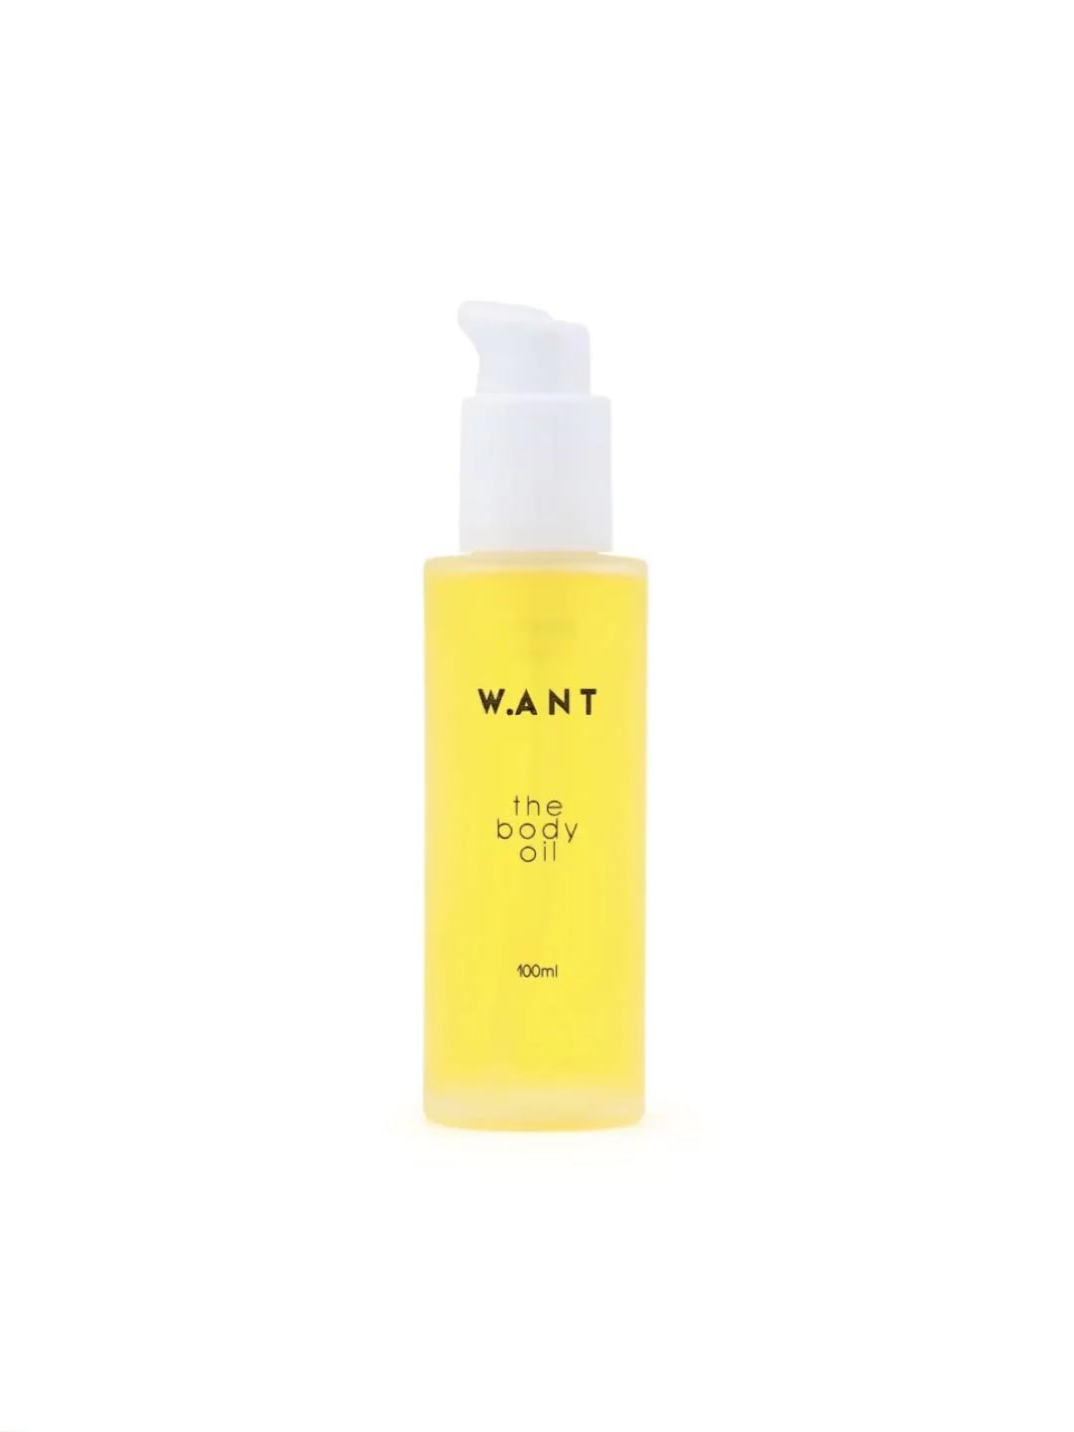 body oil natural ingredients cruelty-free sustainable ethical skincare